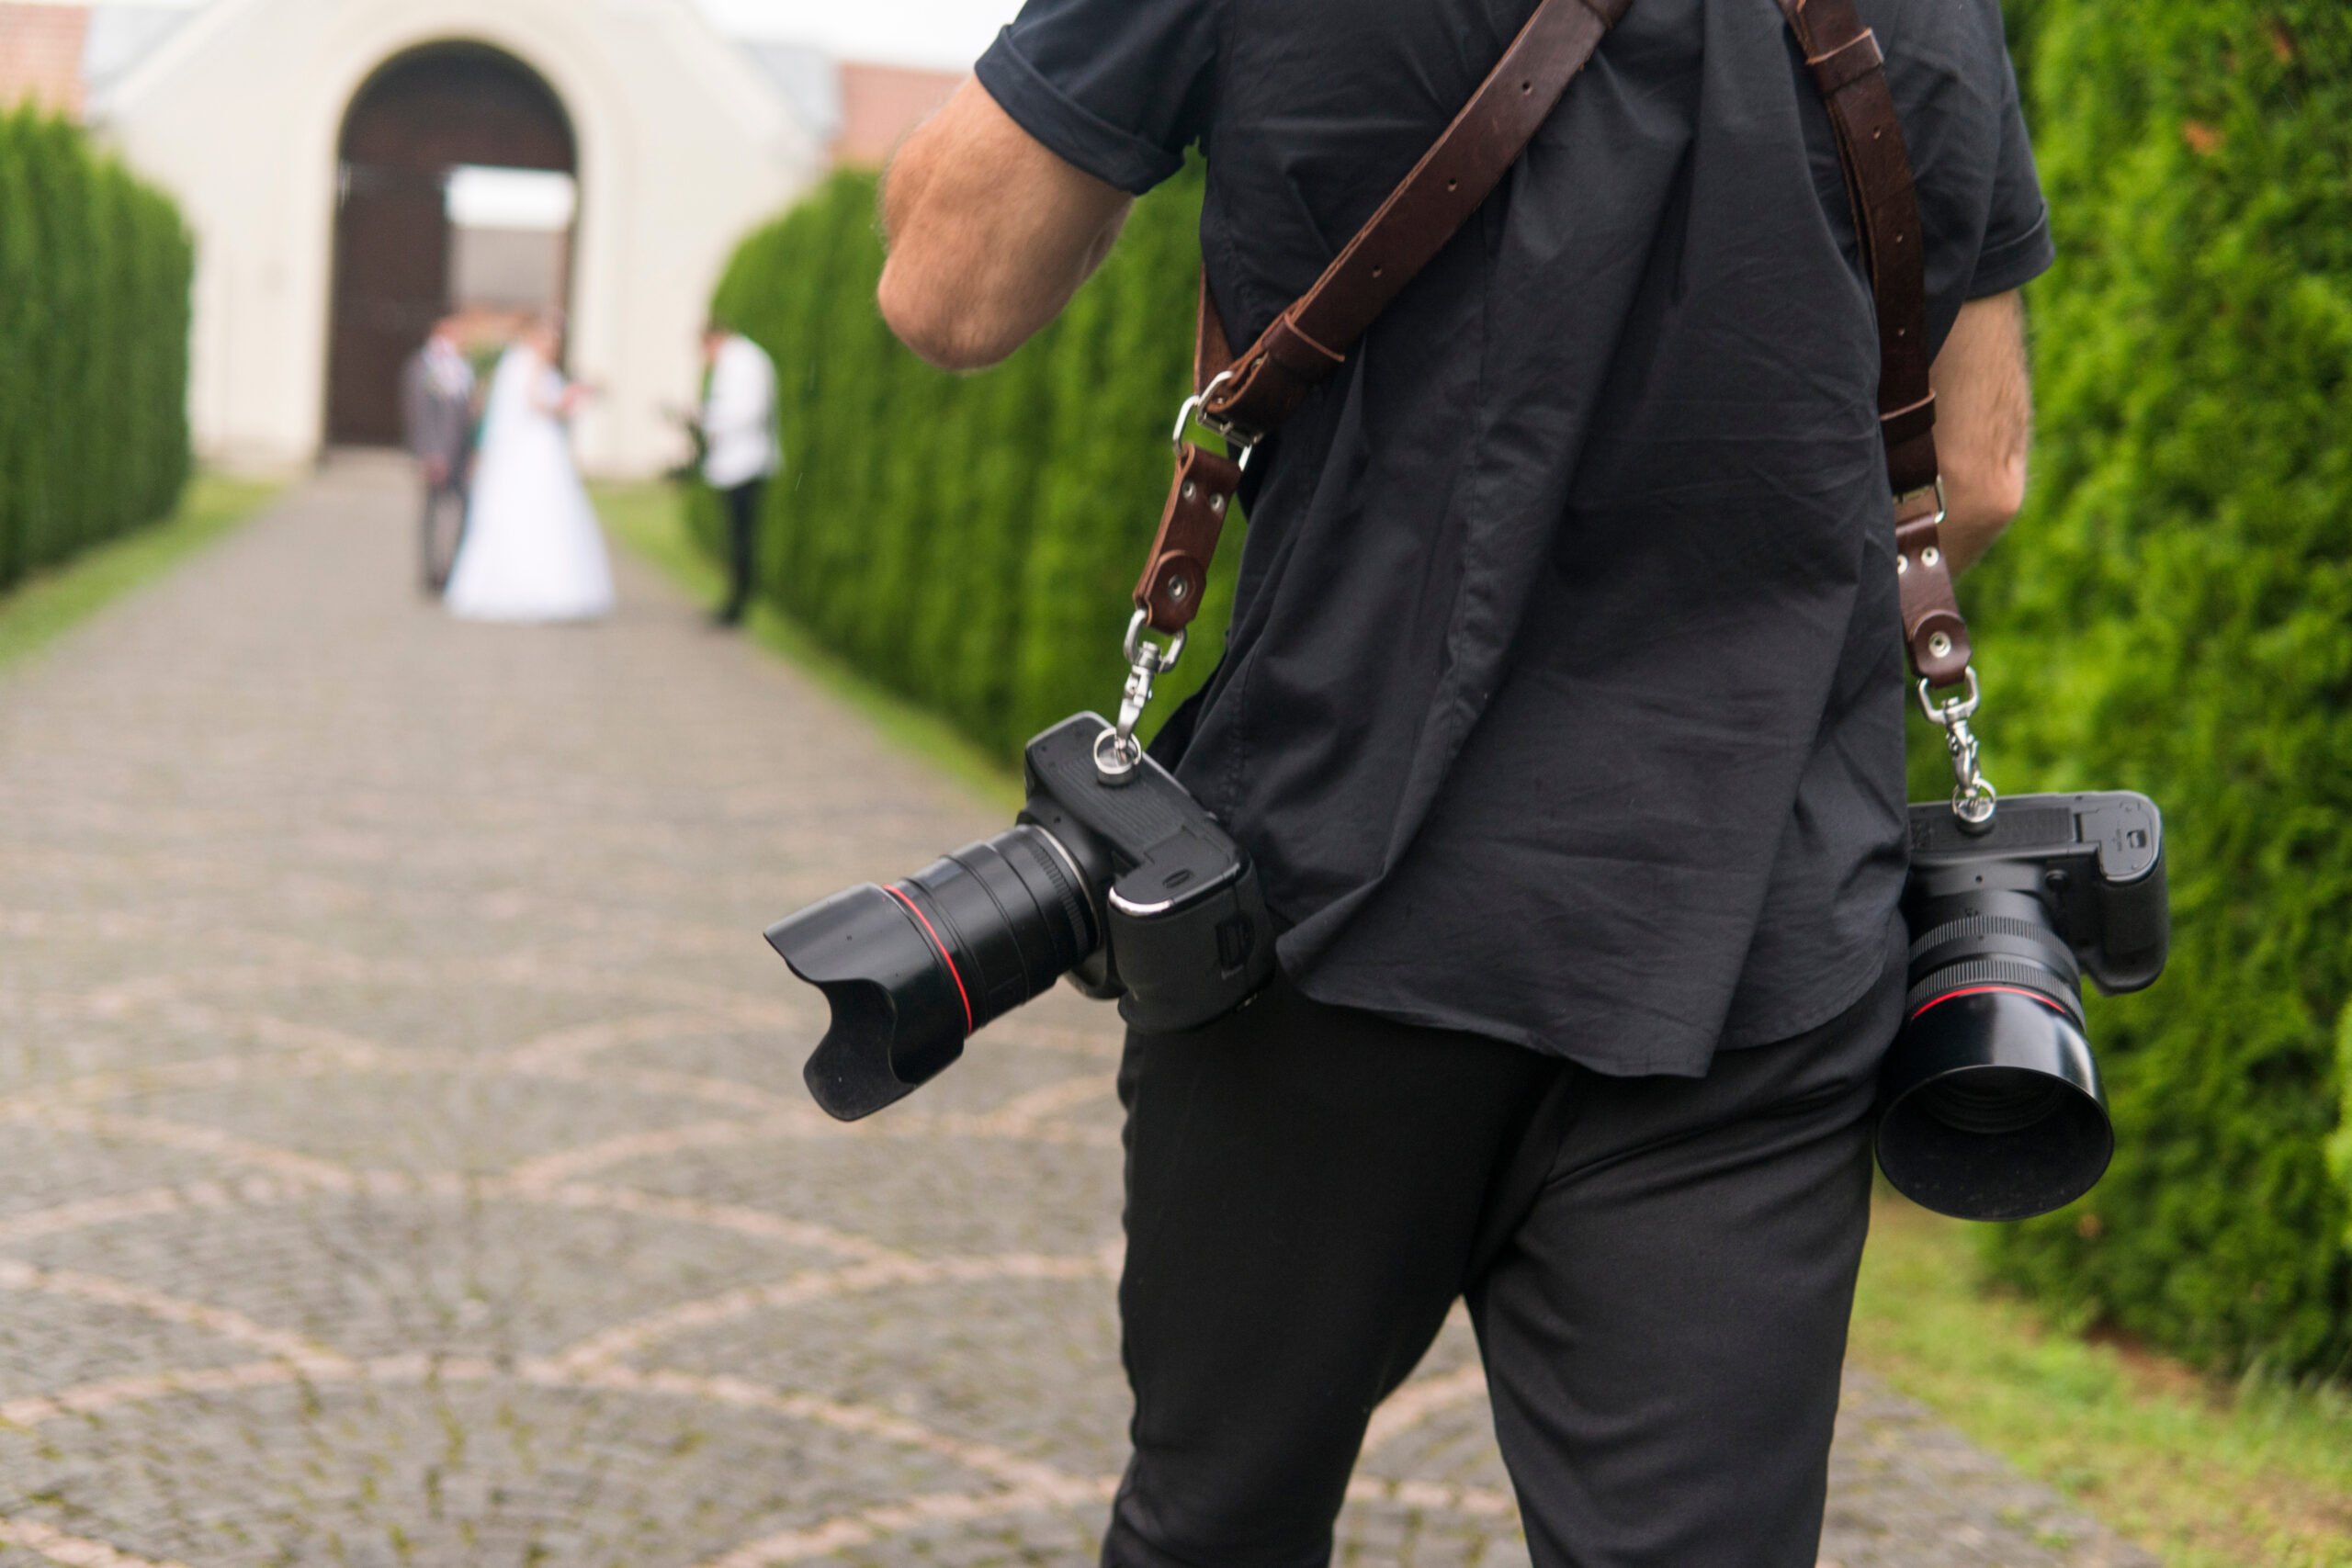 Professional wedding photographer with two cameras on a shoulder straps takes pictures of the bride and groom in a garden